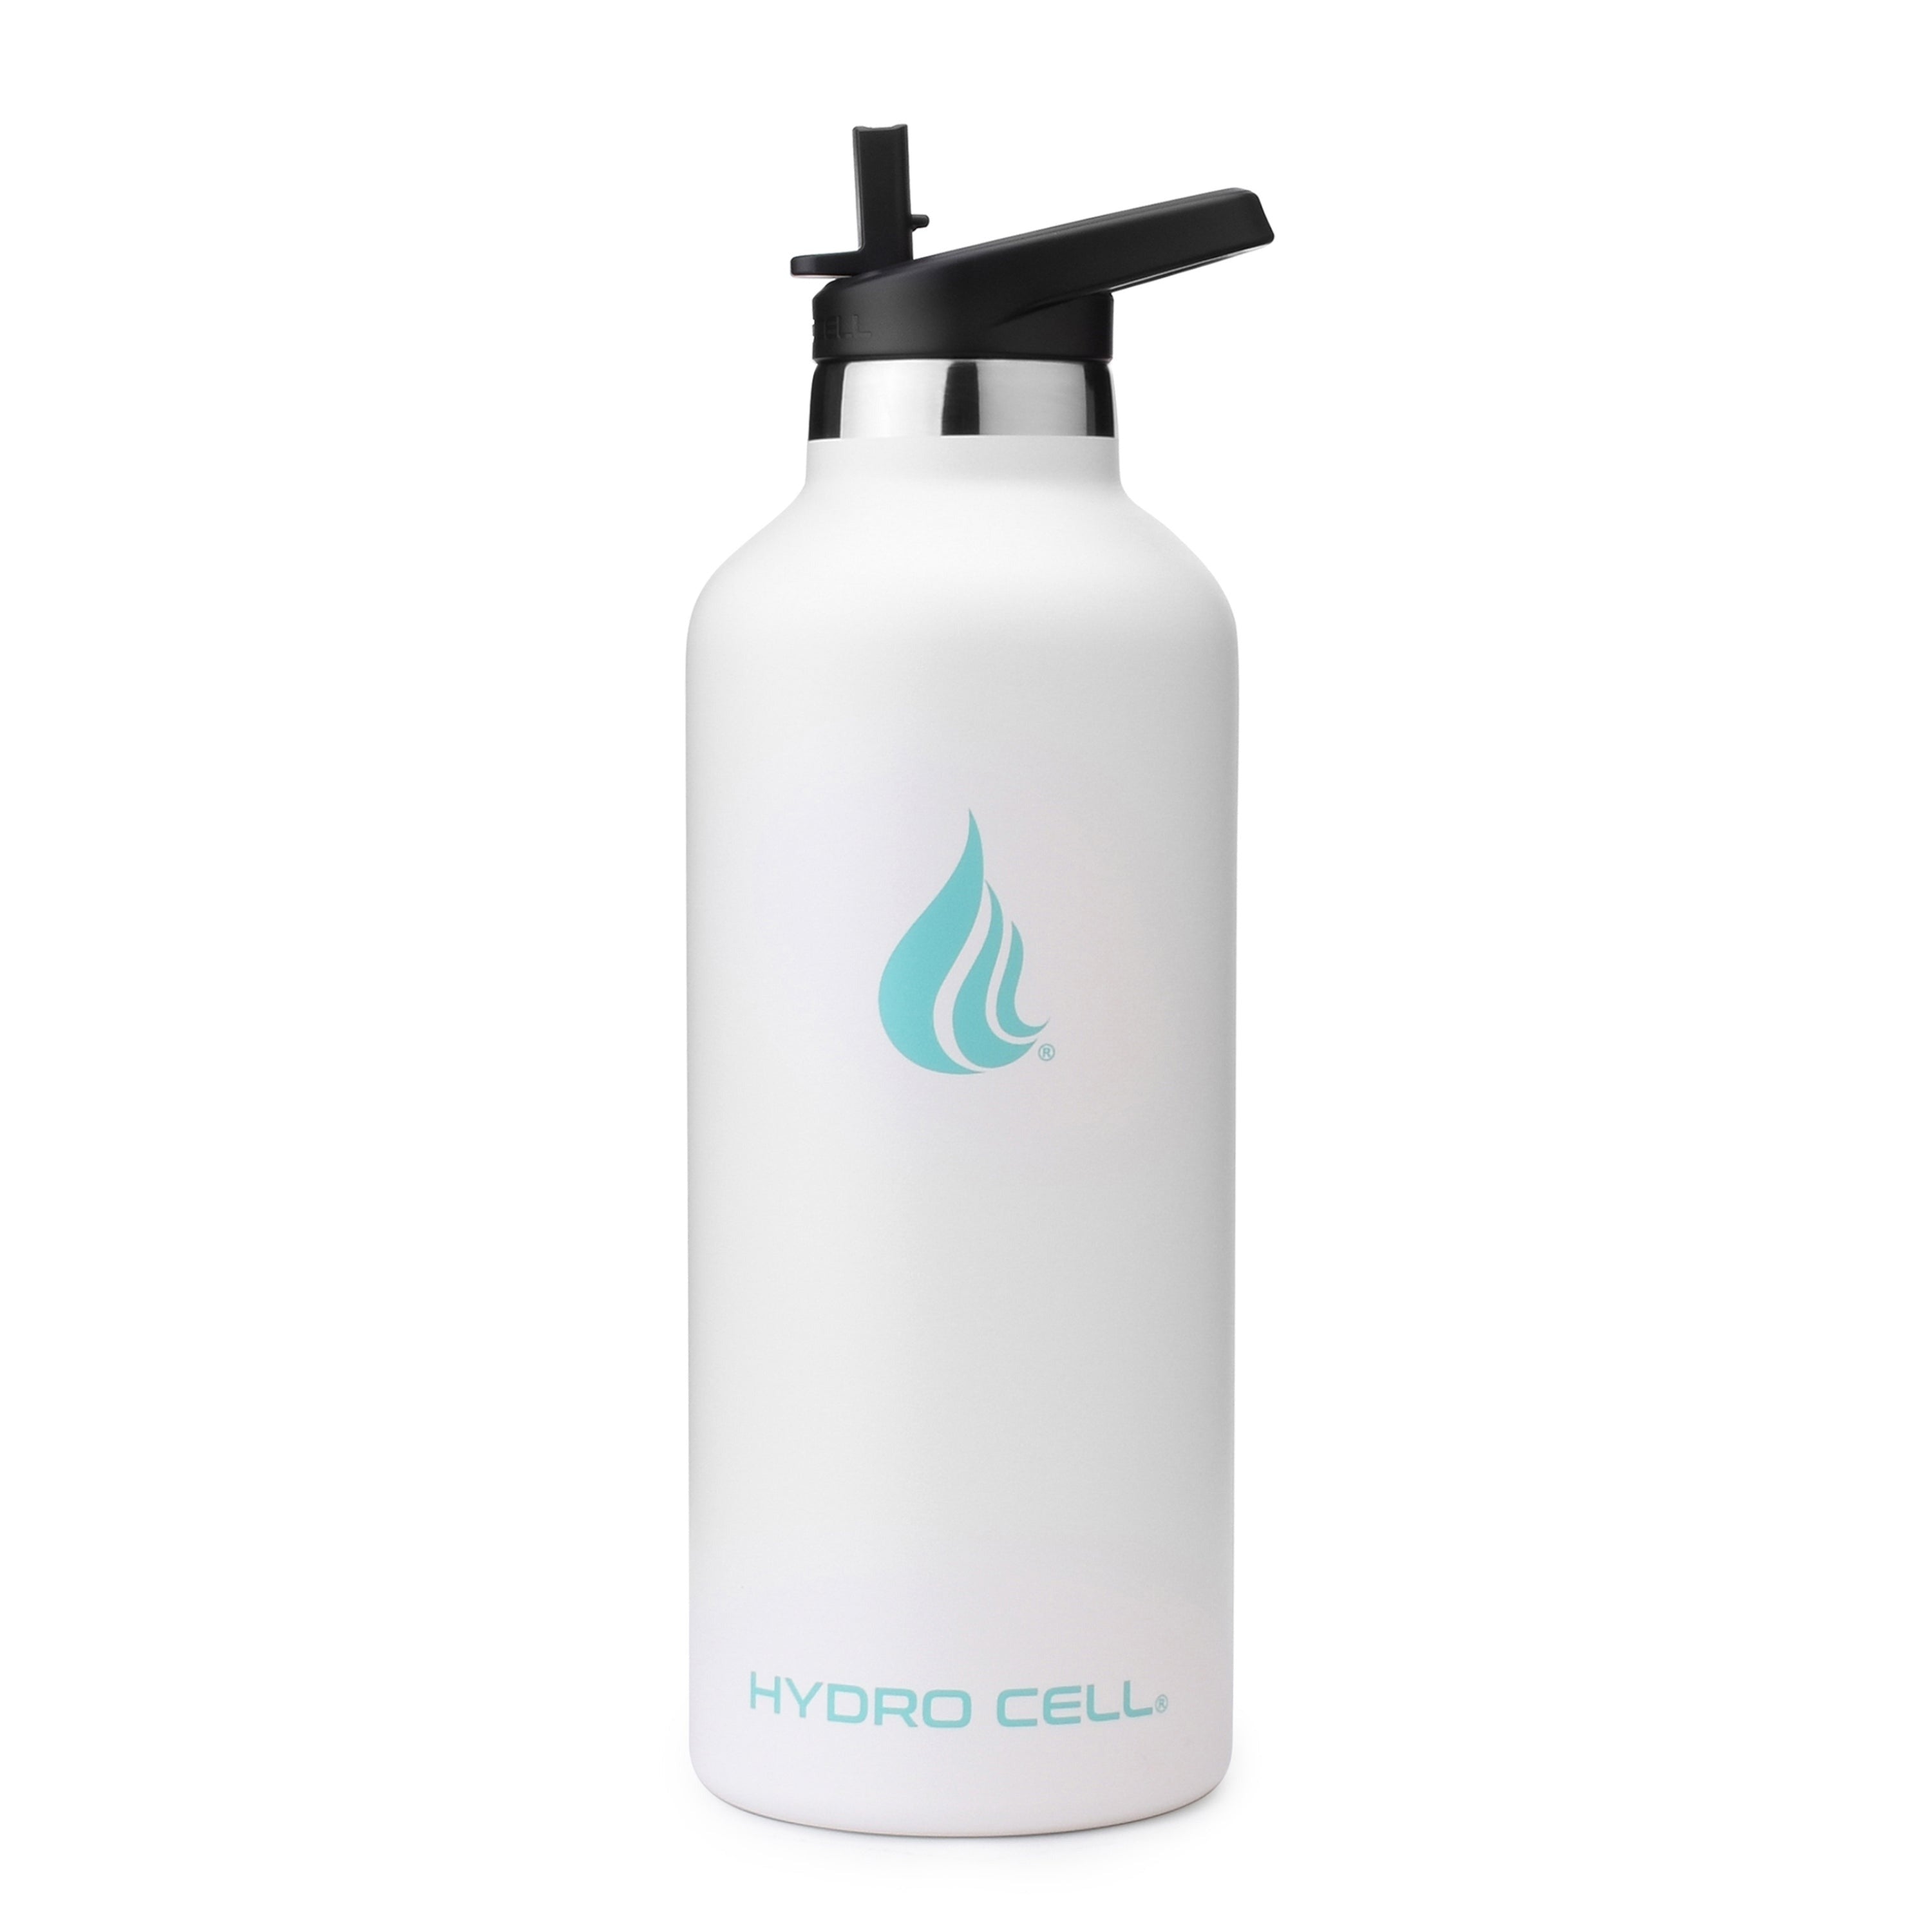 Hydro Flask Food Jar Prime Day deal: Shop this hiking essential